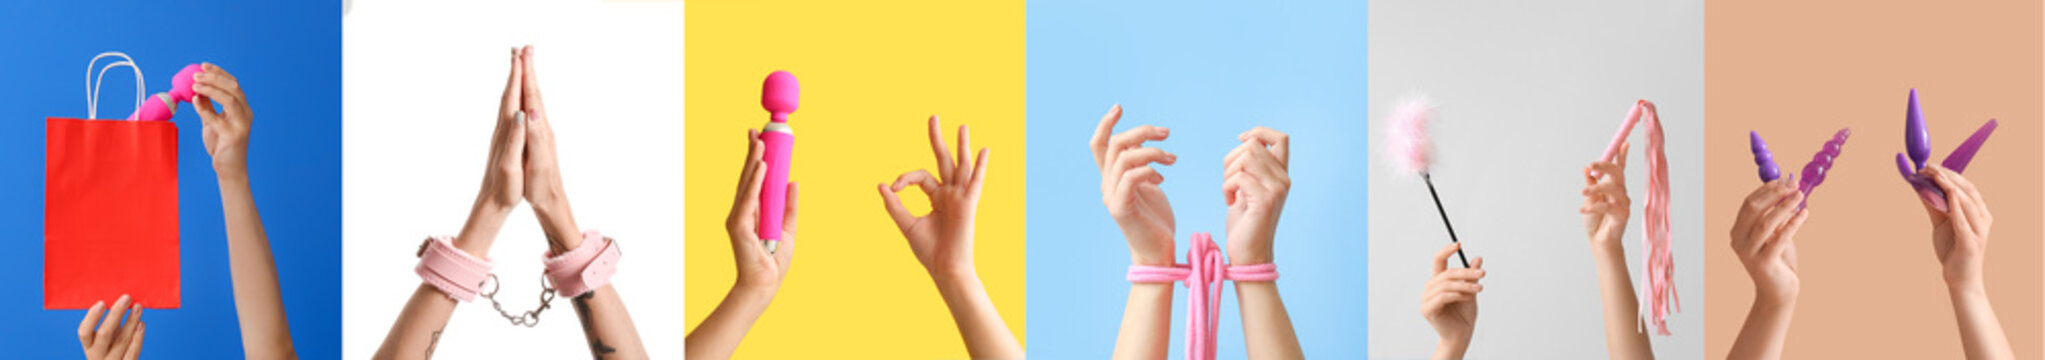 Set of hands with different sex toys on colorful background